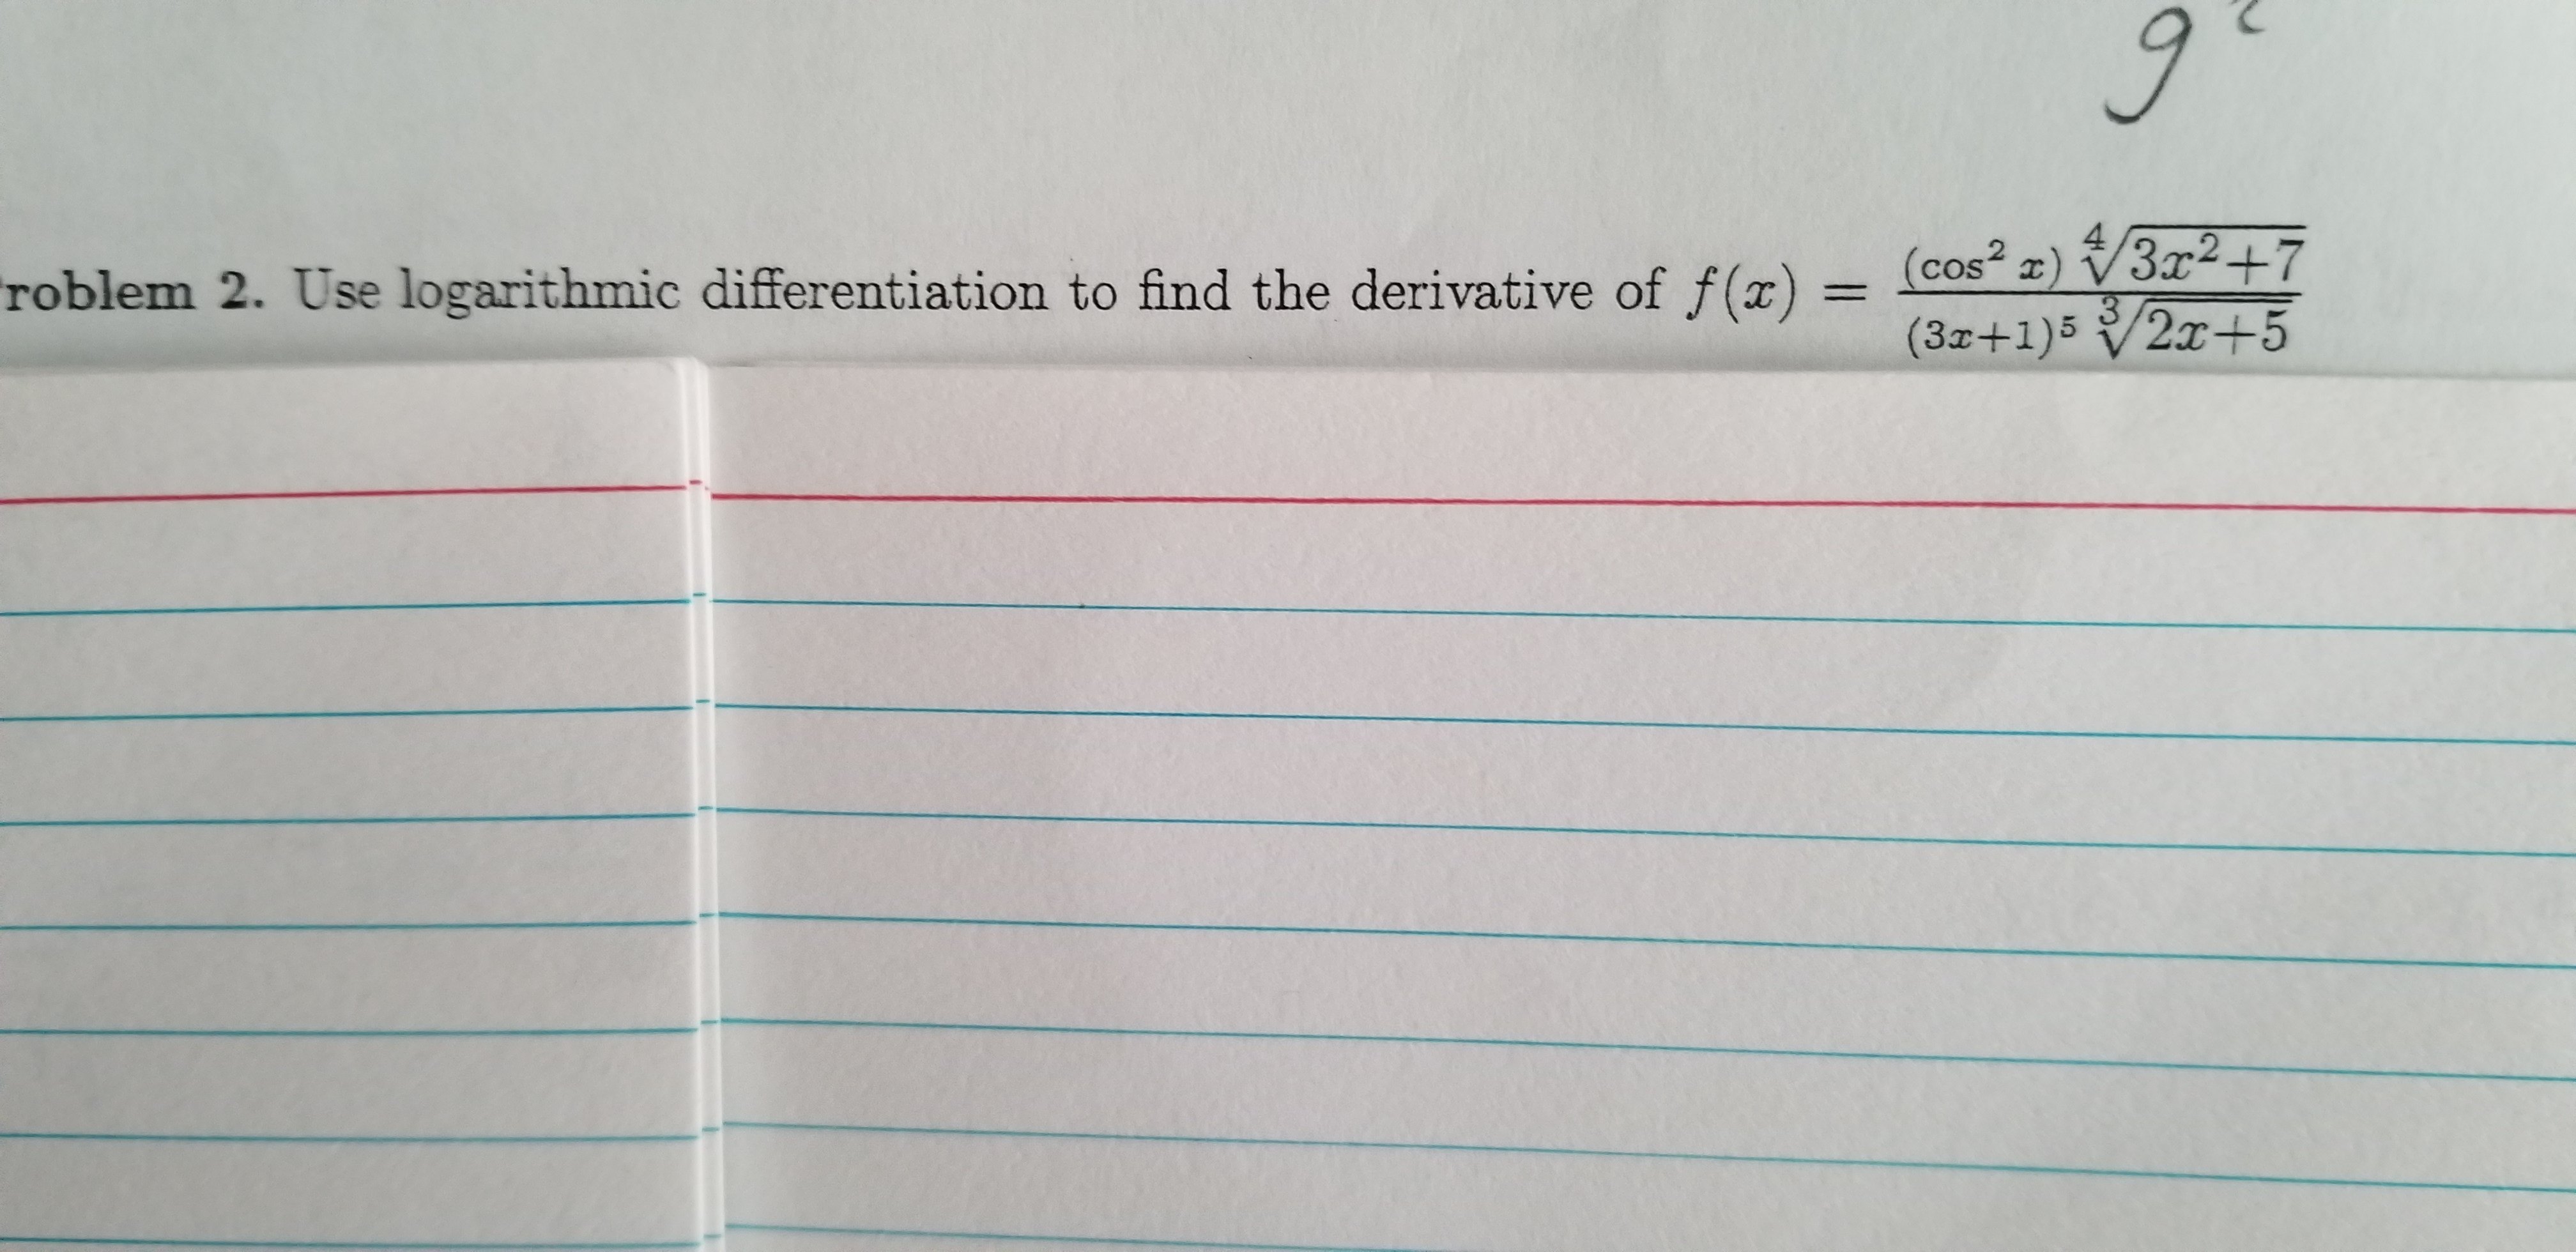 (cos² z) /3x²+7
3.
(3x+1)5/2x+5
3x2+7
roblem 2. Use logarithmic differentiation to find the derivative of f()
